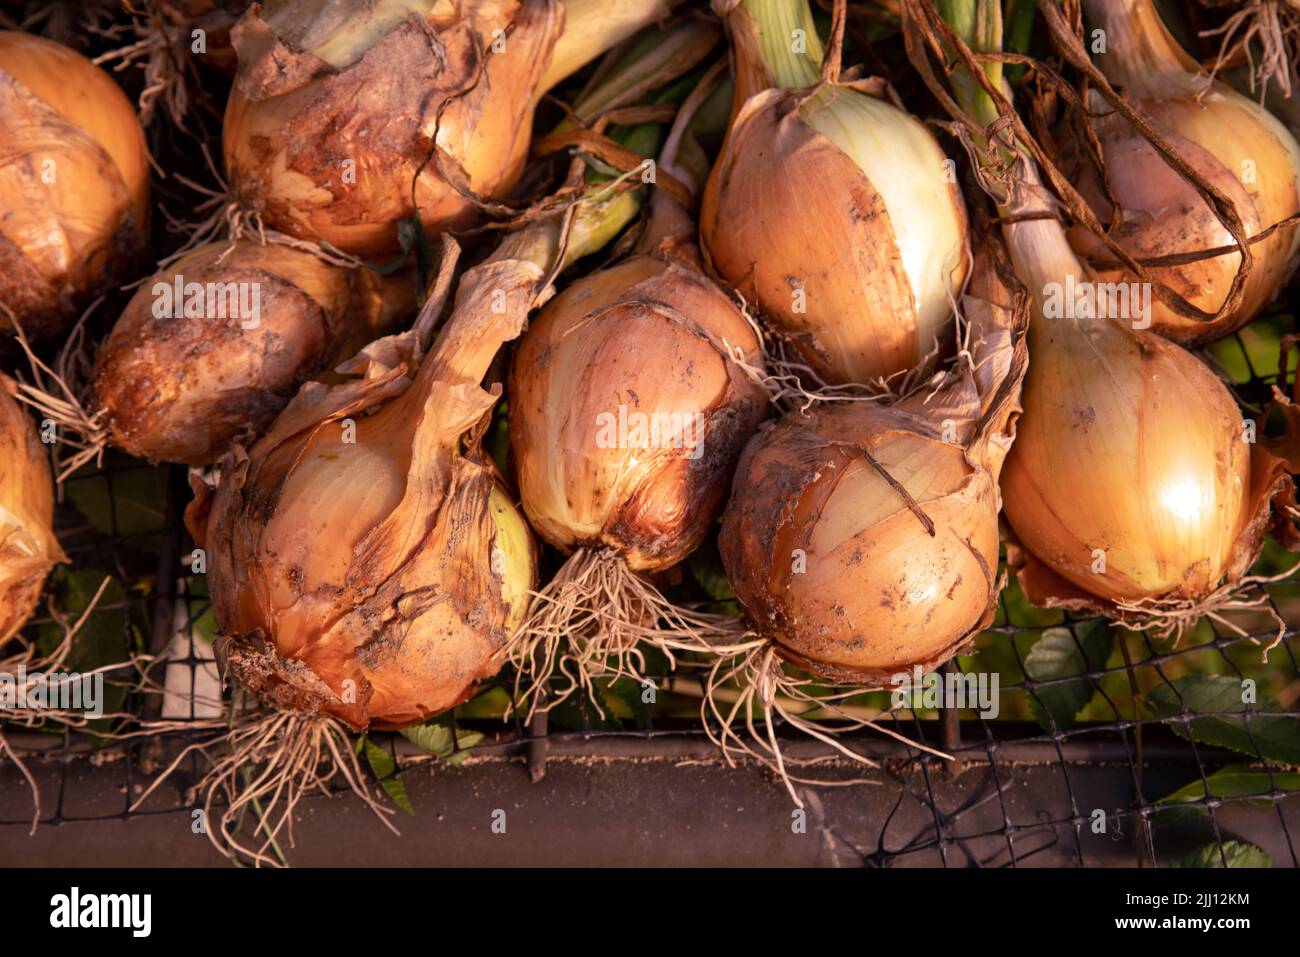 Closeup of harvested yellow onions drying on a screen on organic farm Stock Photo